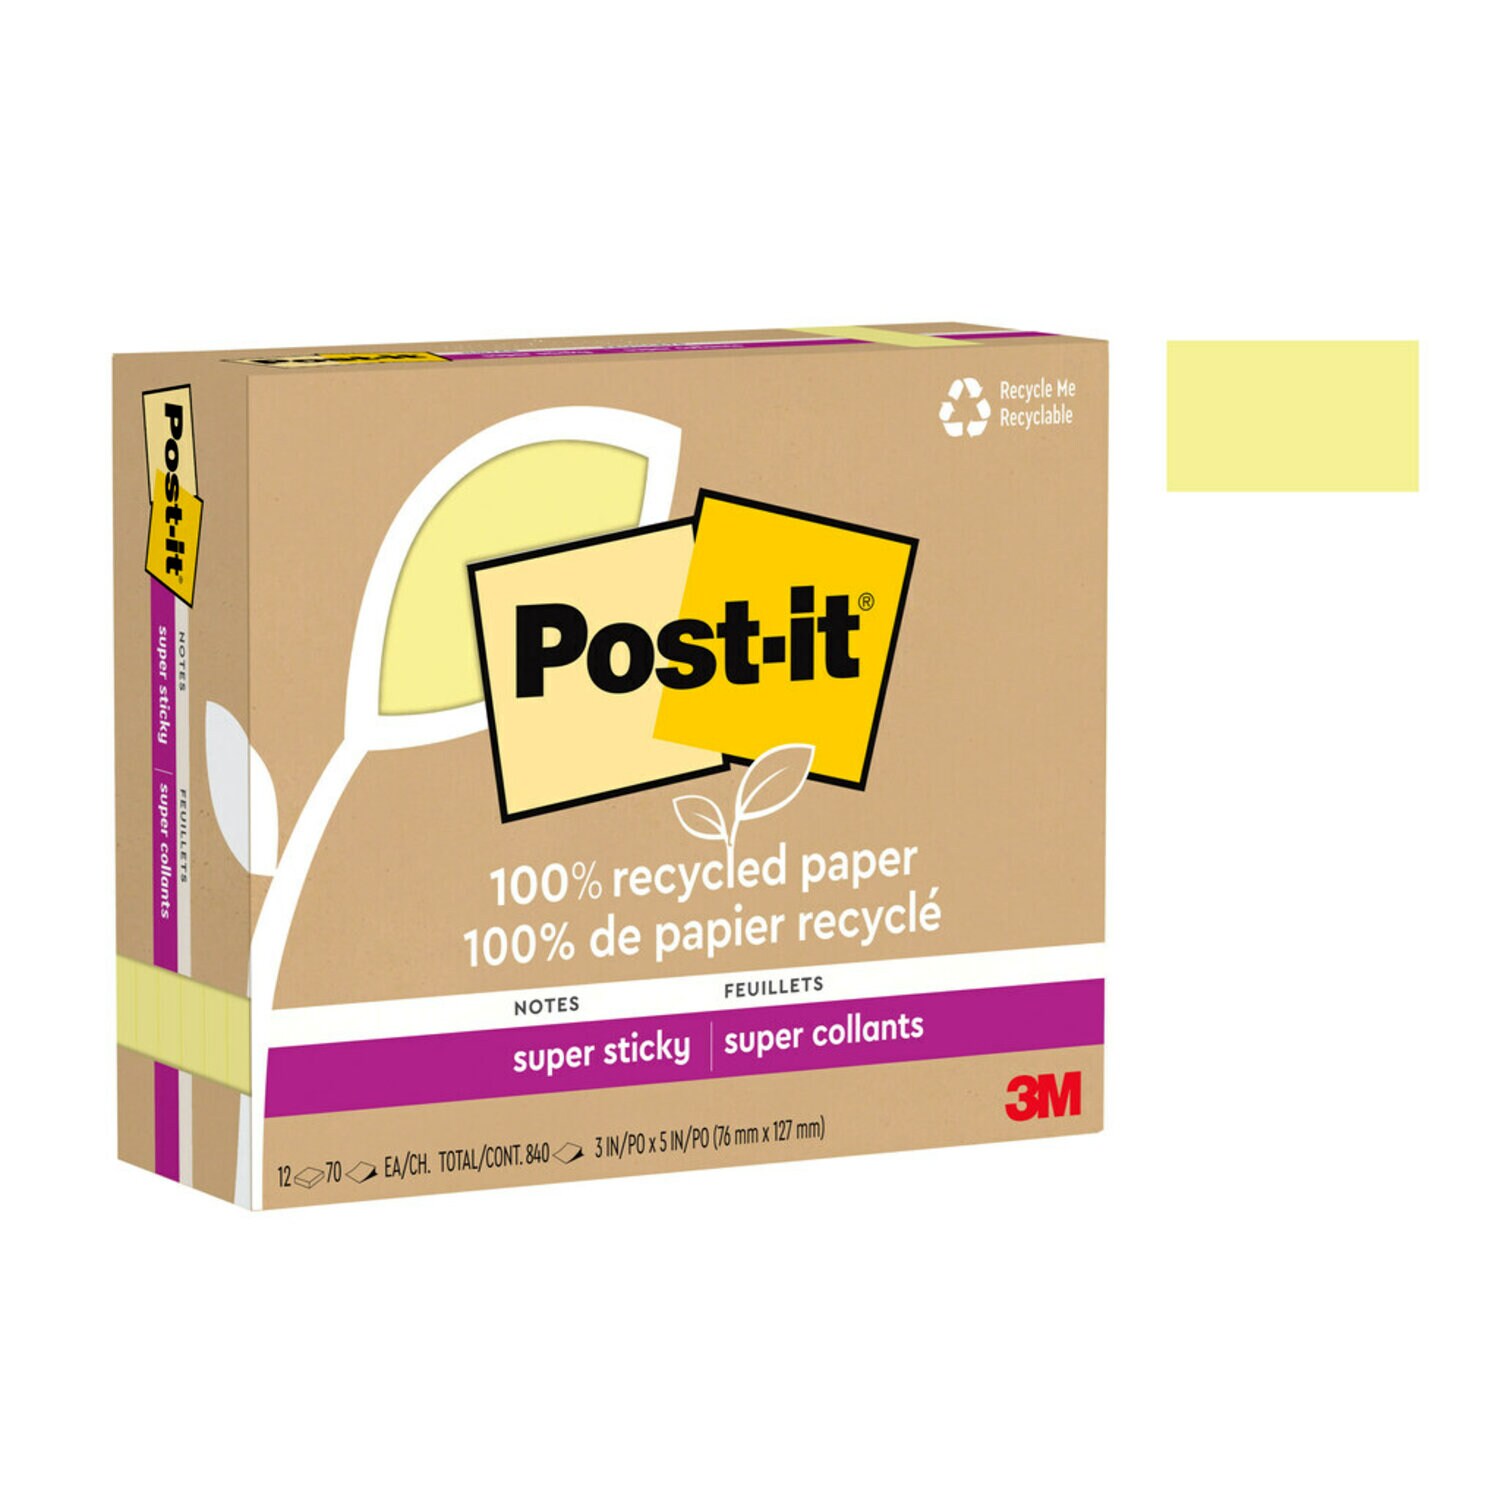 7100290364 - Post-it Super Sticky Recycled Notes 655R-12SSCY, 3 in x 5 in (76 mm x 127 mm)